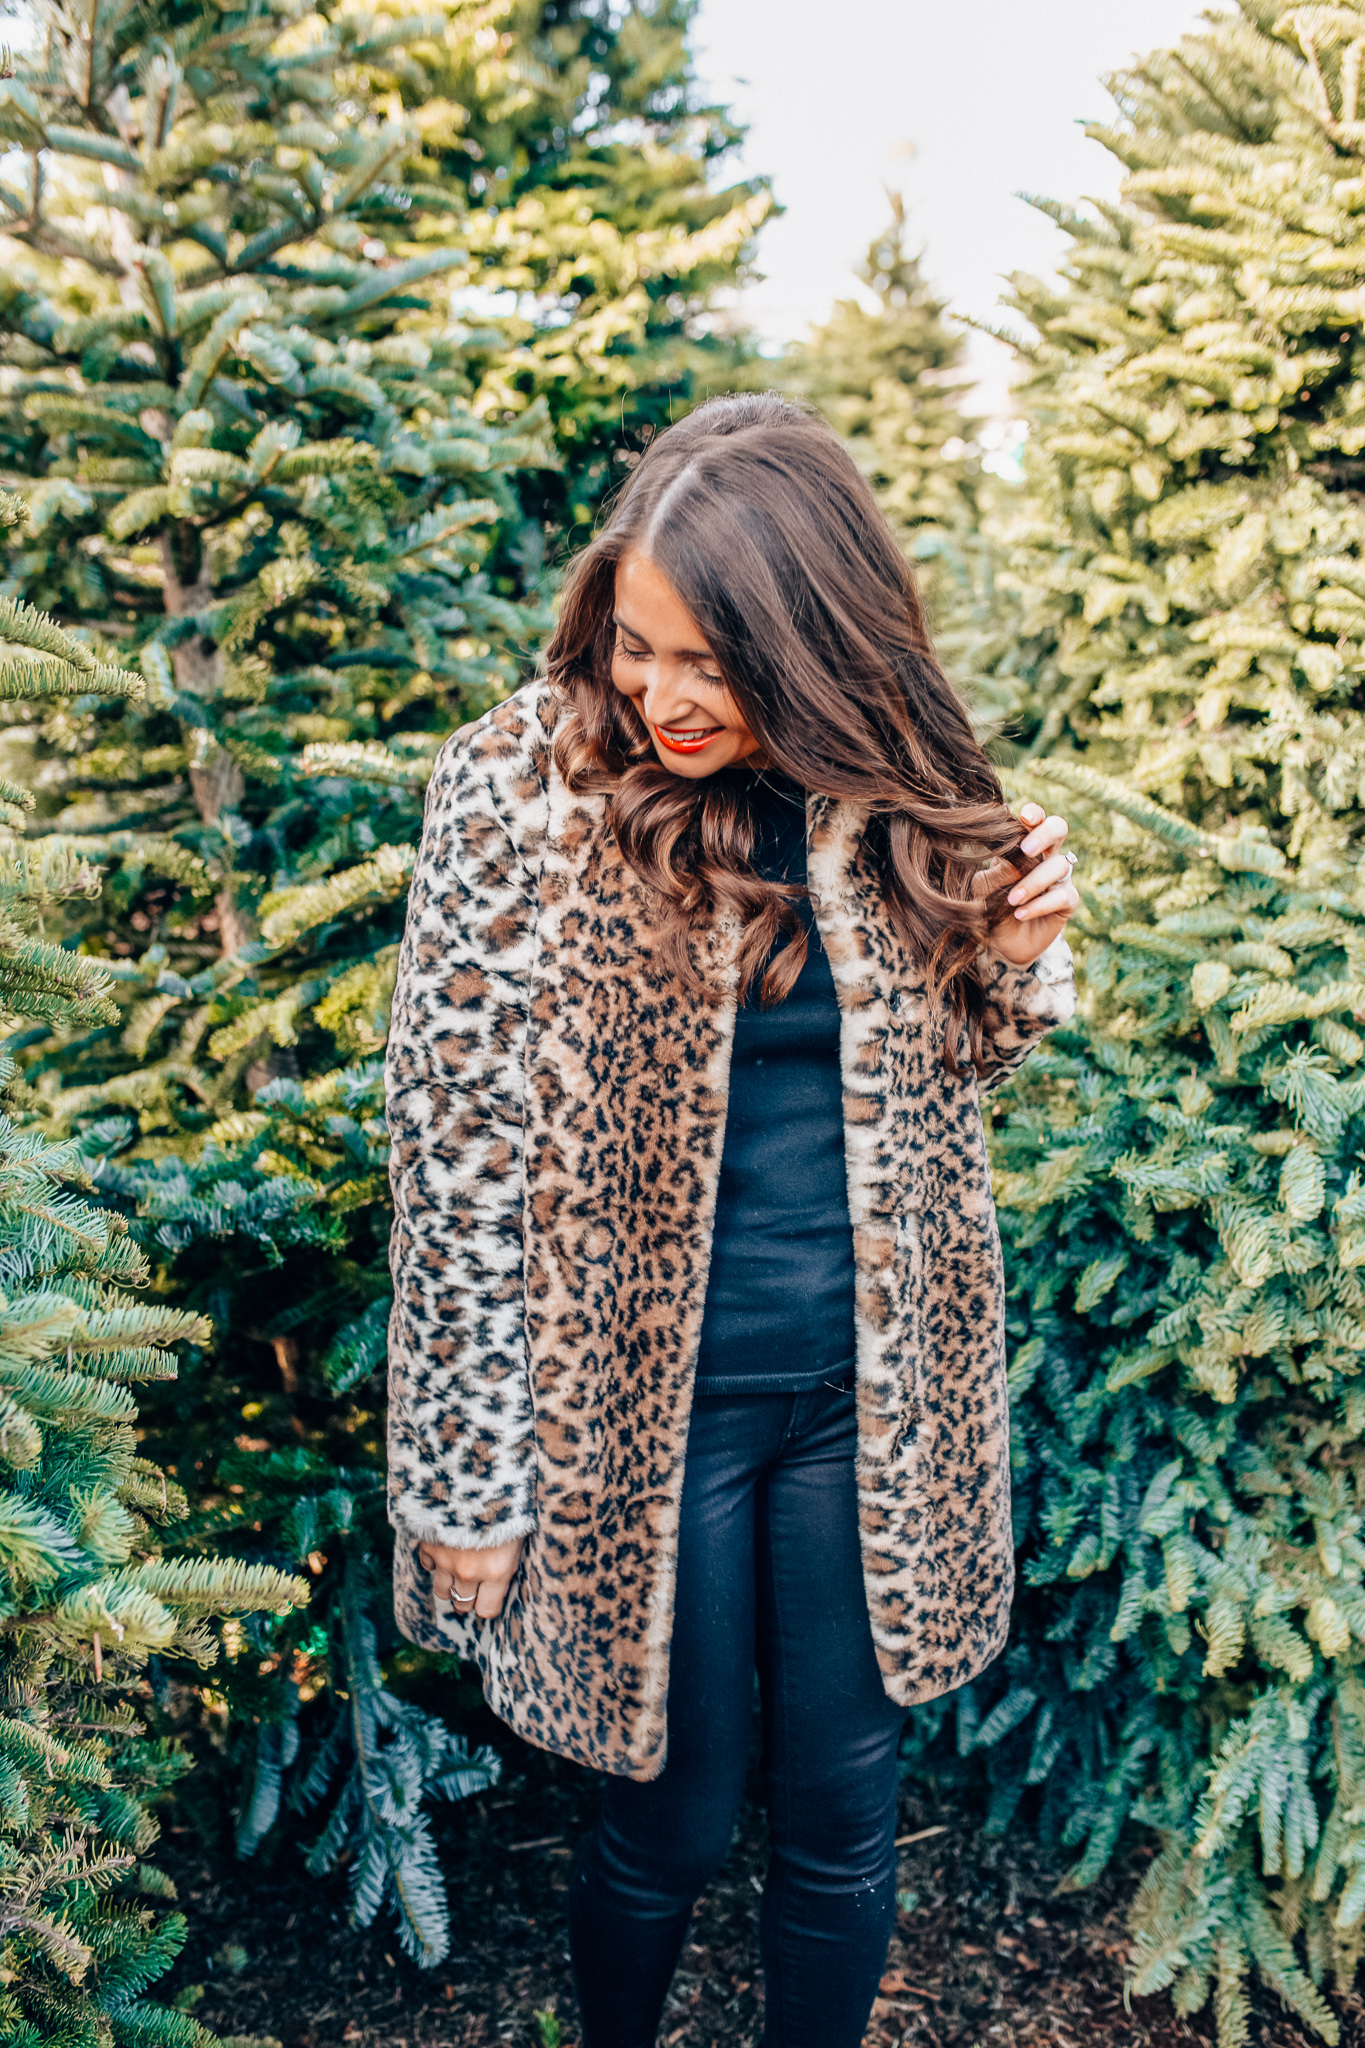 Leopard Holiday style featured by top Orange County fashion blogger, Maxie Elle: image of a woman wearing an Ann Taylor leopard print coat, Ann Taylor 3/4 sleeve black sweater, Ann Taylor black skinny jeans, and Ann Taylor block heel booties